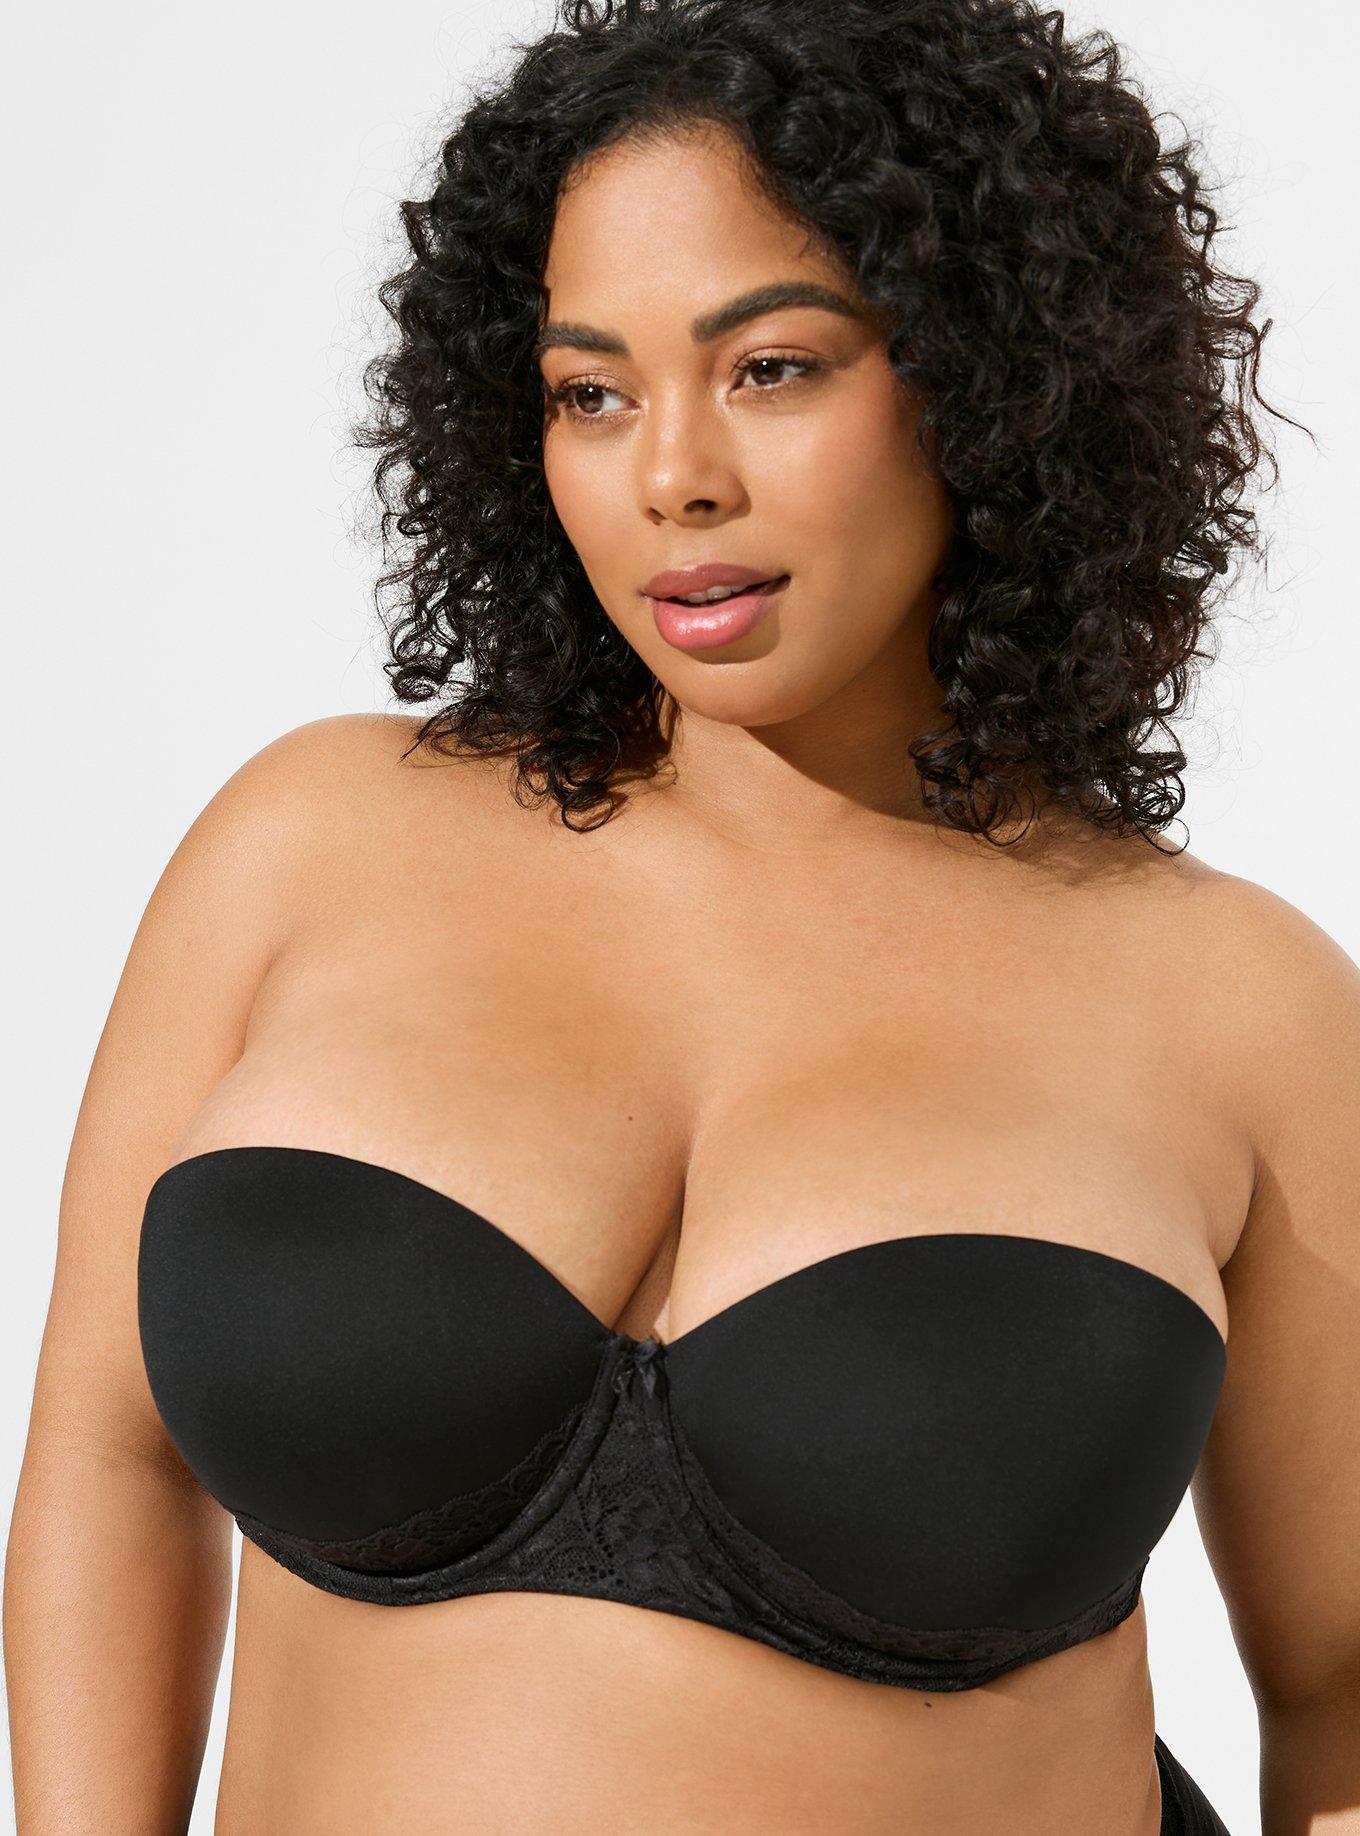 Strapless Bra with the BEST SUPPORT for Big Boobs! - Erica